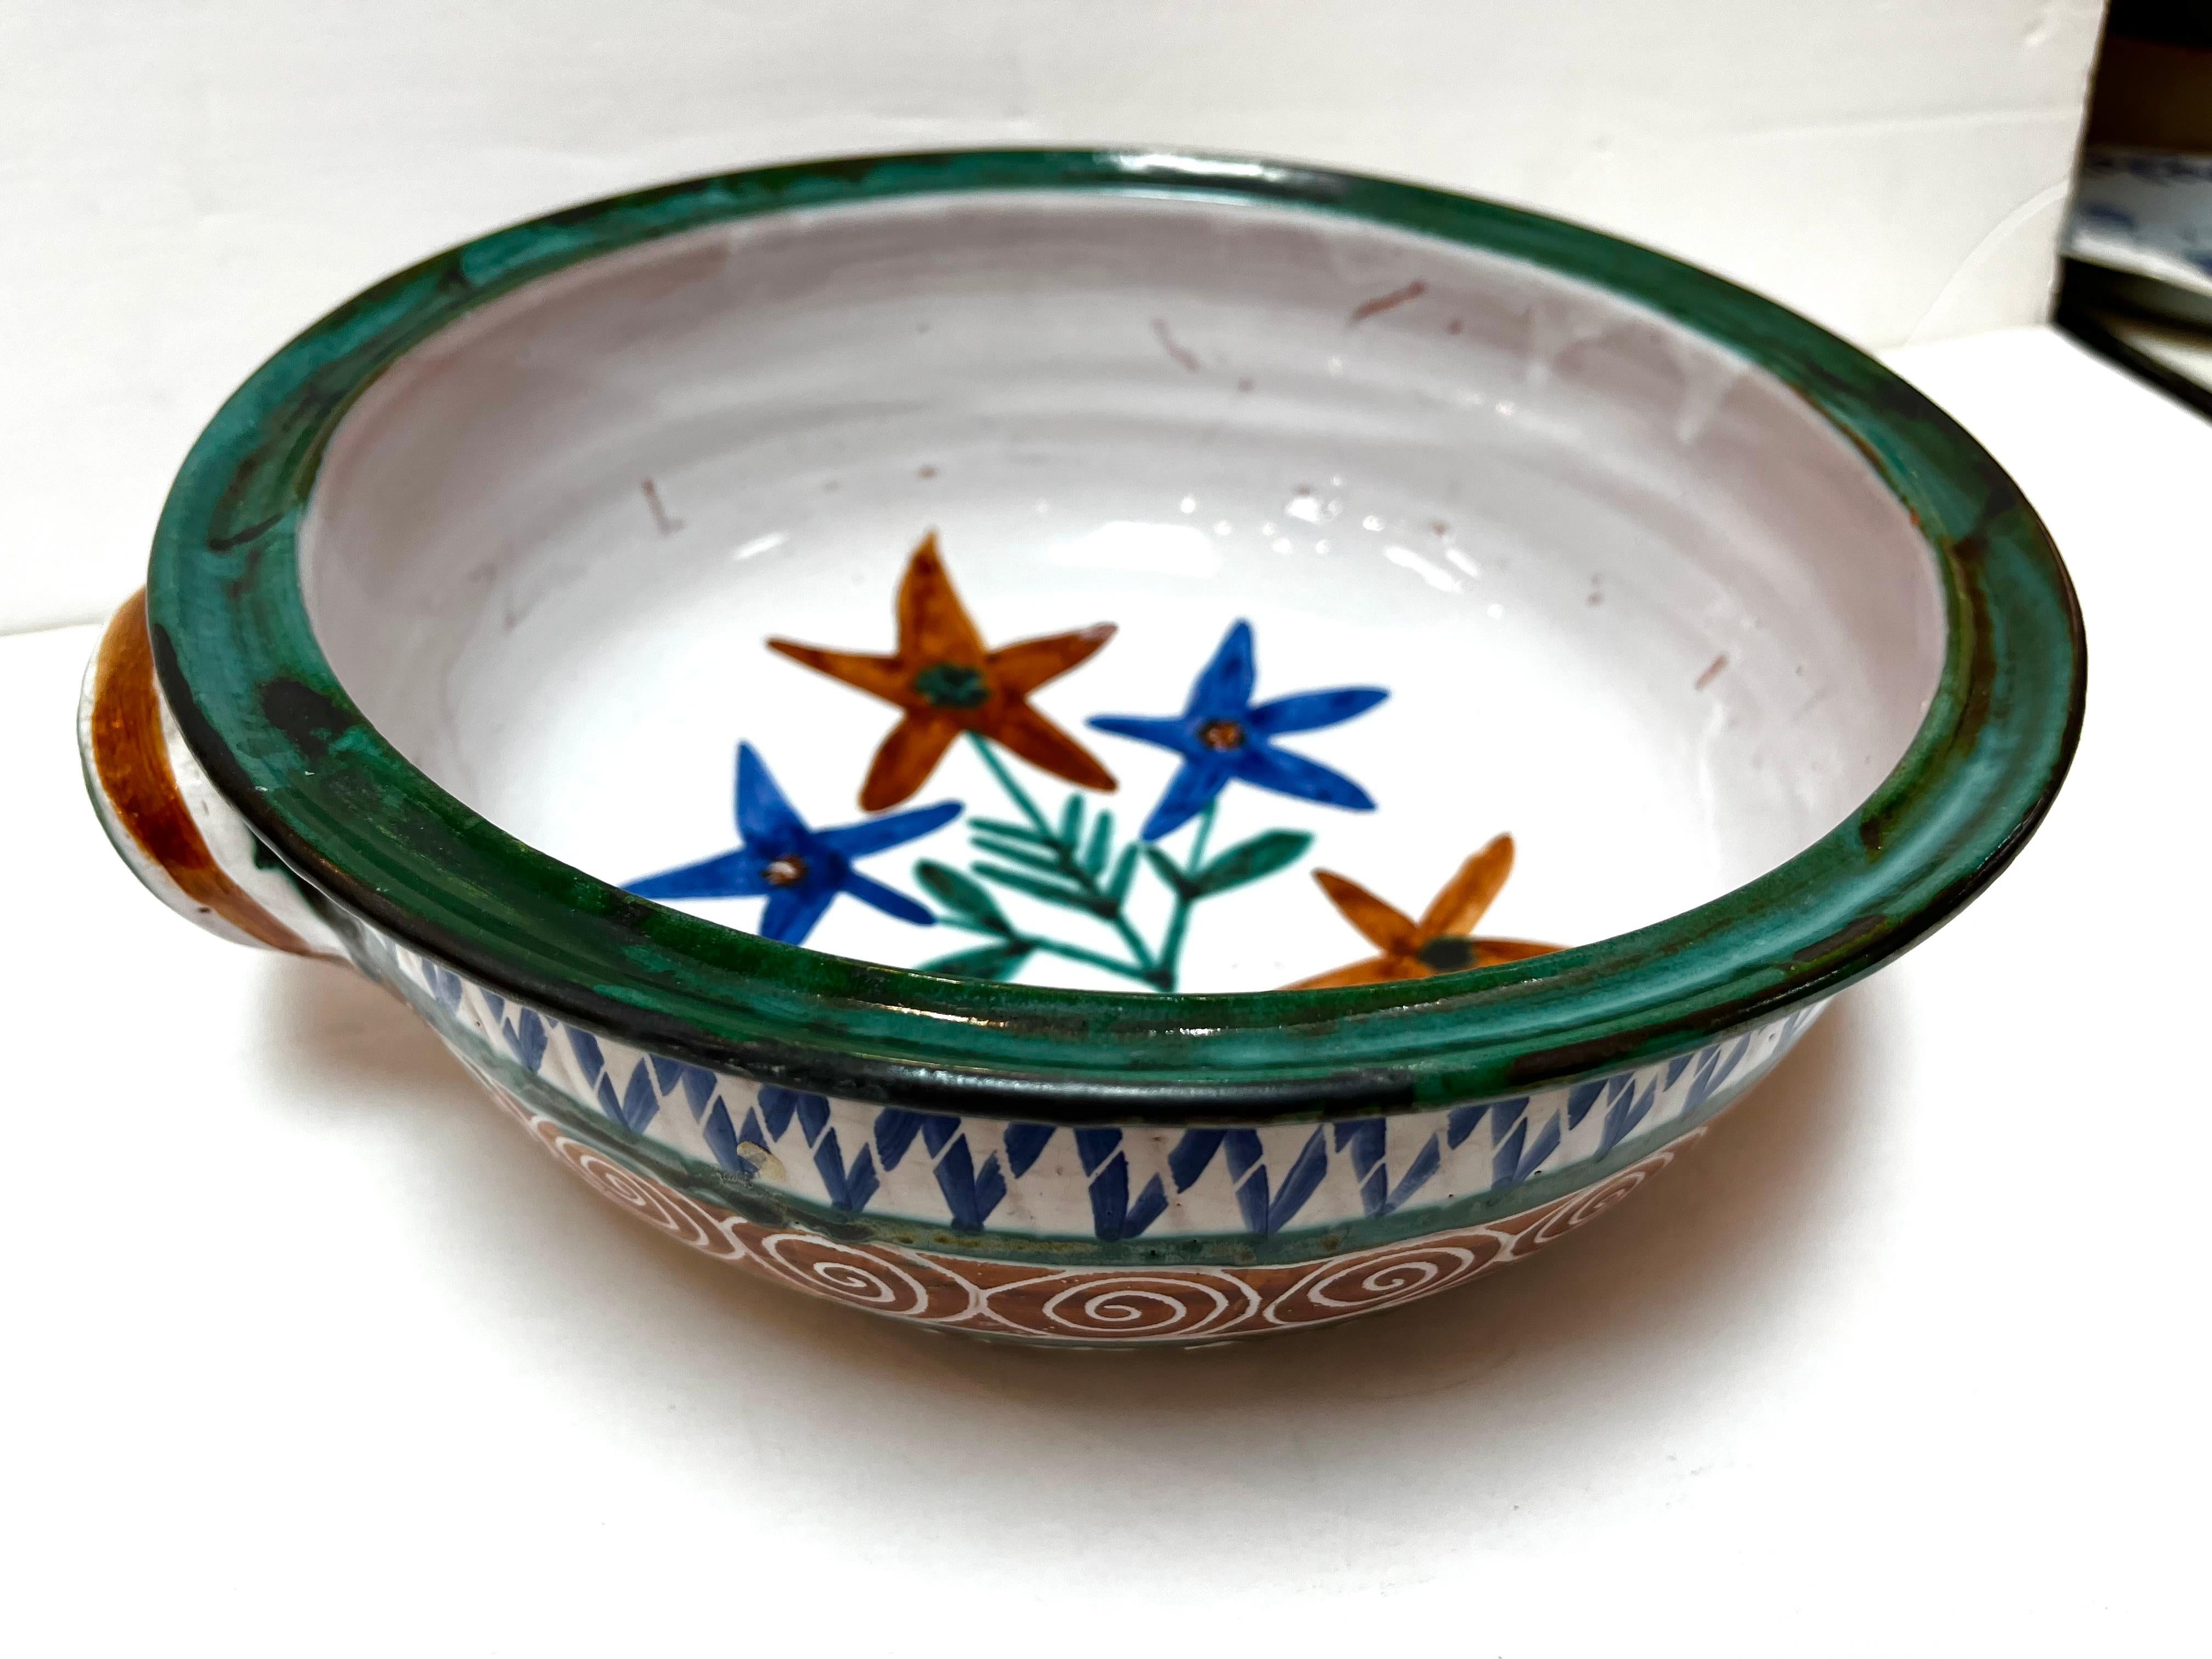 A large, double handled mid century hand painted ceramic dish by French artist Robert Picault. This dish features various geometric designs on the outside and a floral design on the inside. From the studio pottery website, “Robert Picault was born